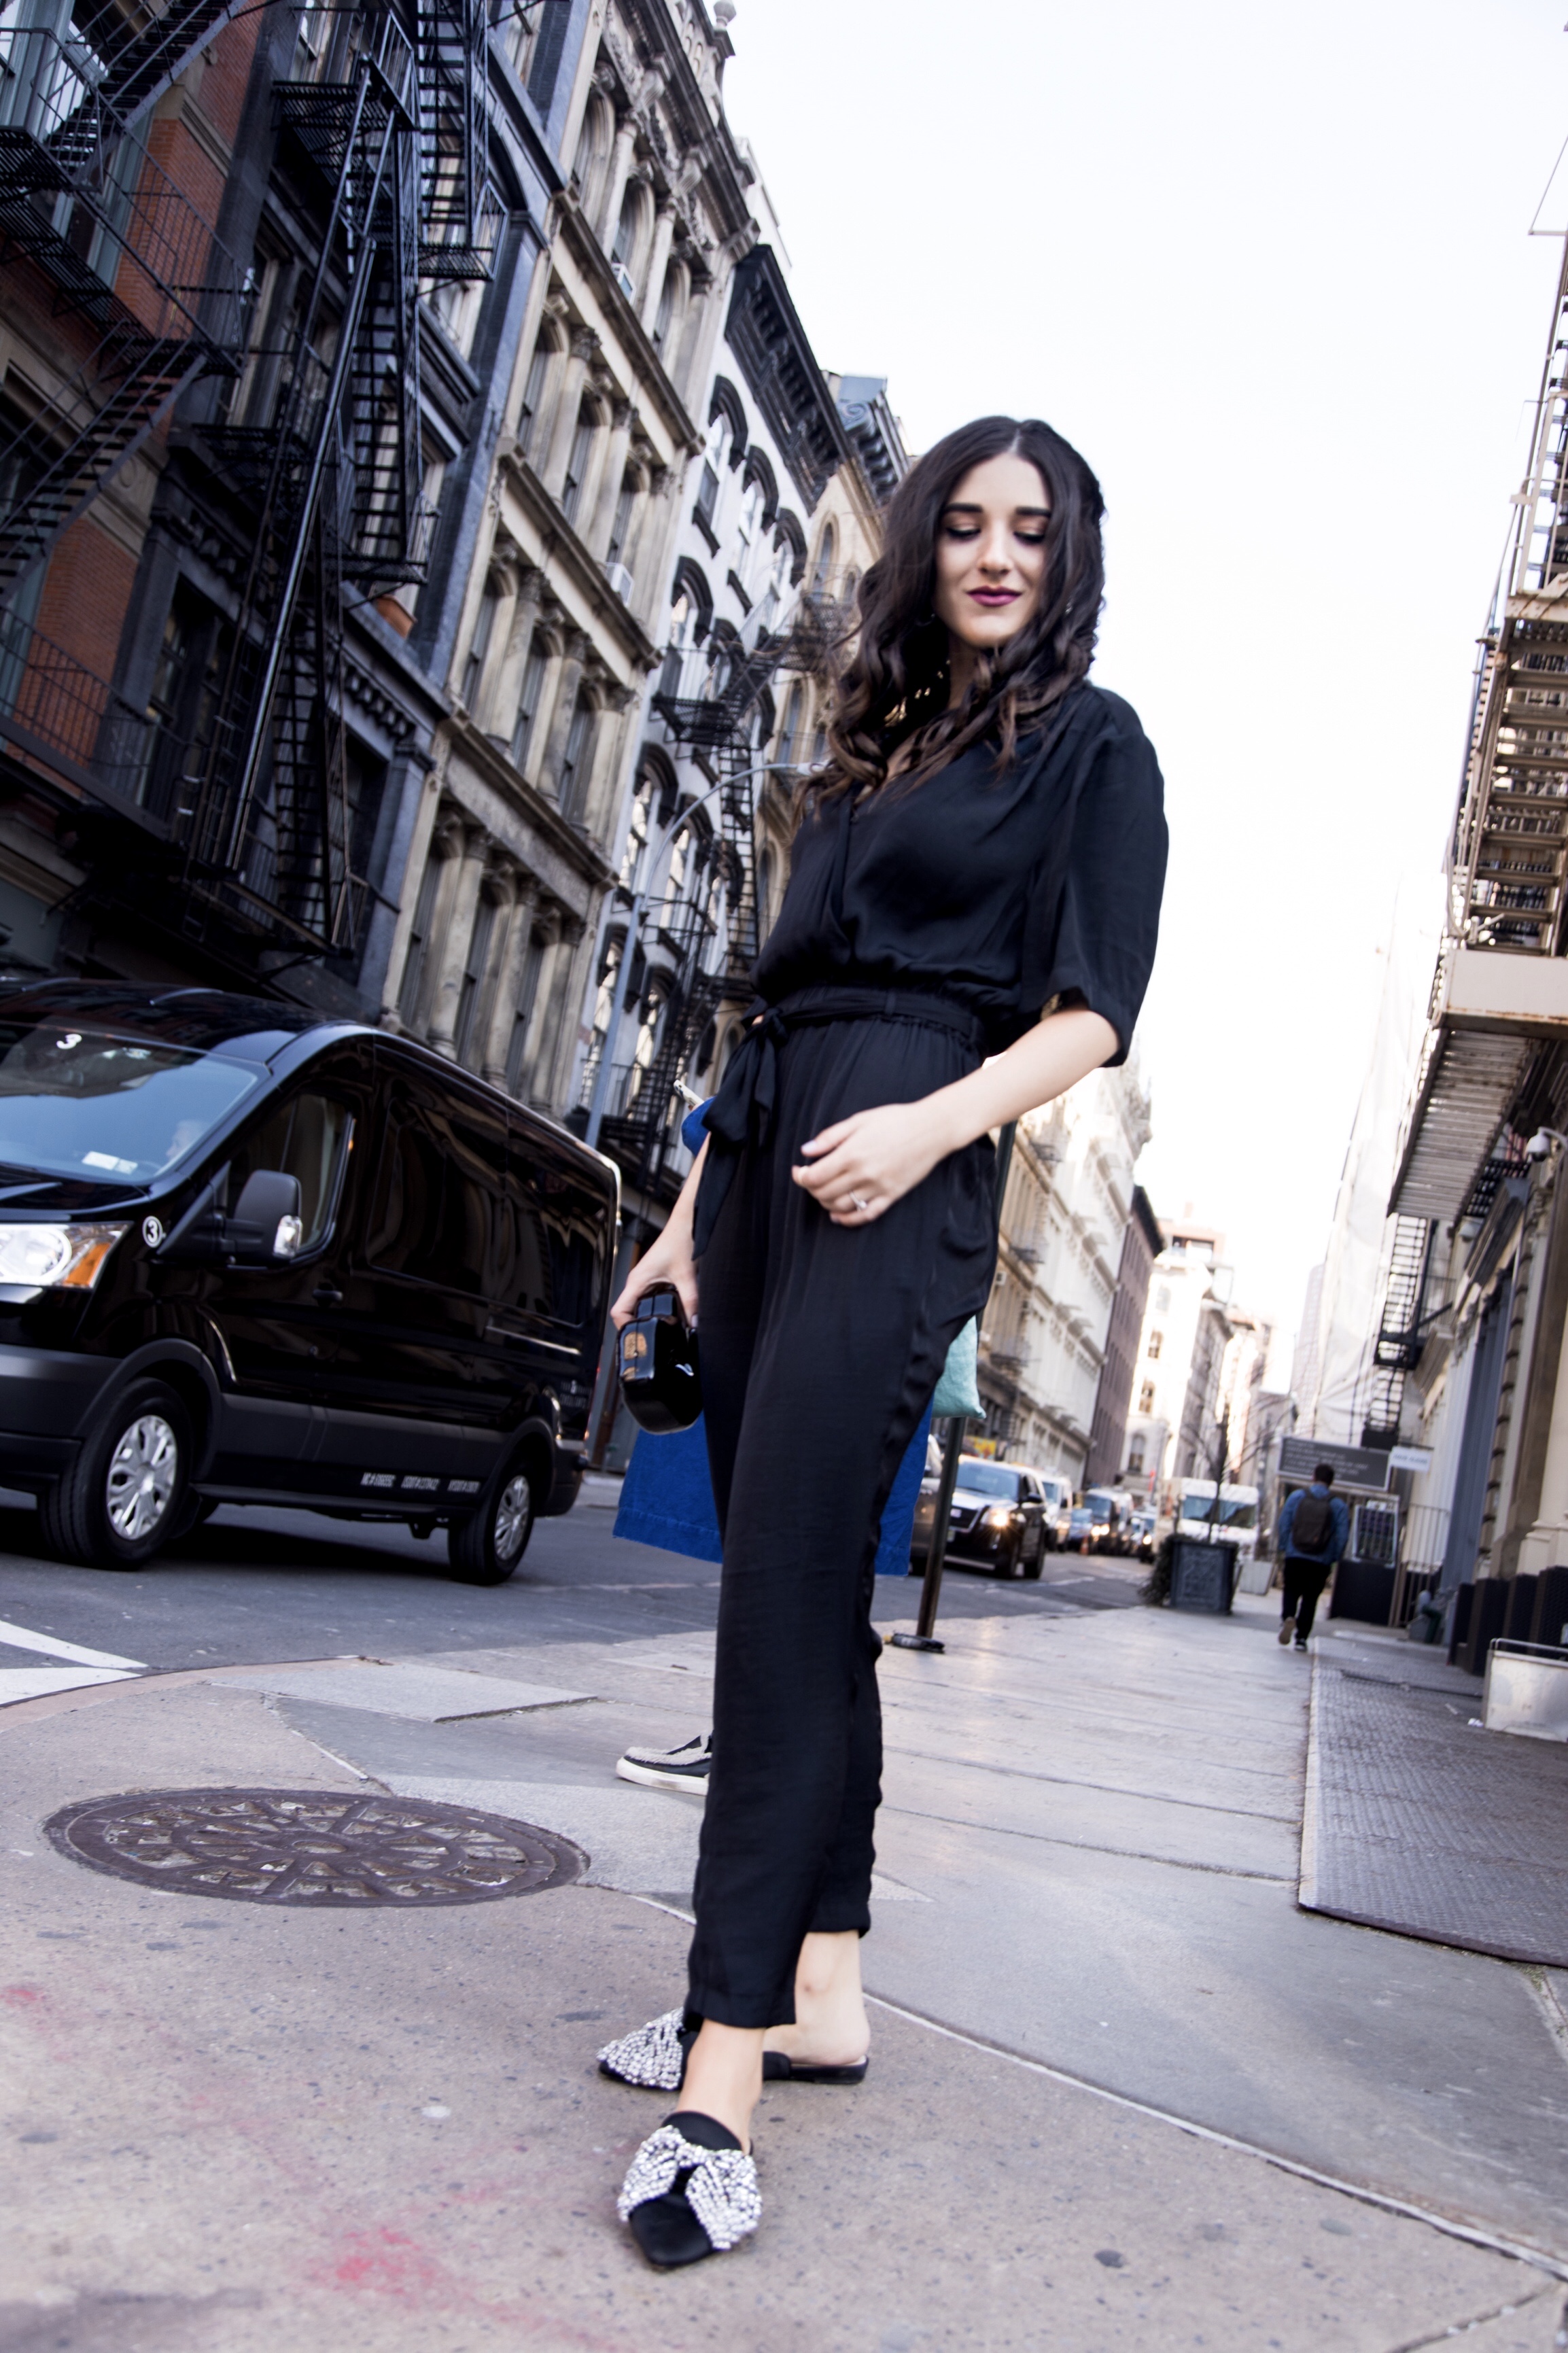 Where We're Going For Our Honeymoon Black Silk Jumpsuit Bow Mules Esther Santer Fashion Blog NYC Street Style Blogger Outfit OOTD Trendy Urban Outfitters Betsey Johnson Soho Collab Jeweled Shoes Earrings Braid Hairstyle Hoops  Necklace Lips Clutch Bag.jpg